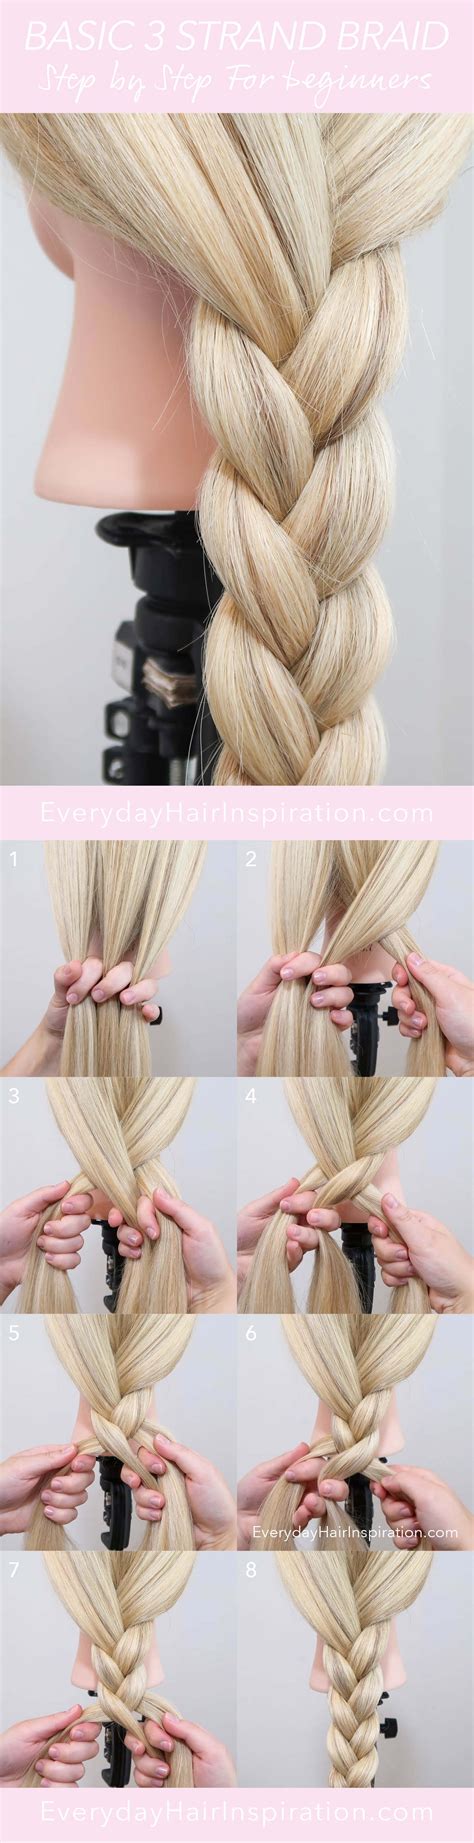 Unique How To Braid Hair Step By Step For Beginners For Short Hair